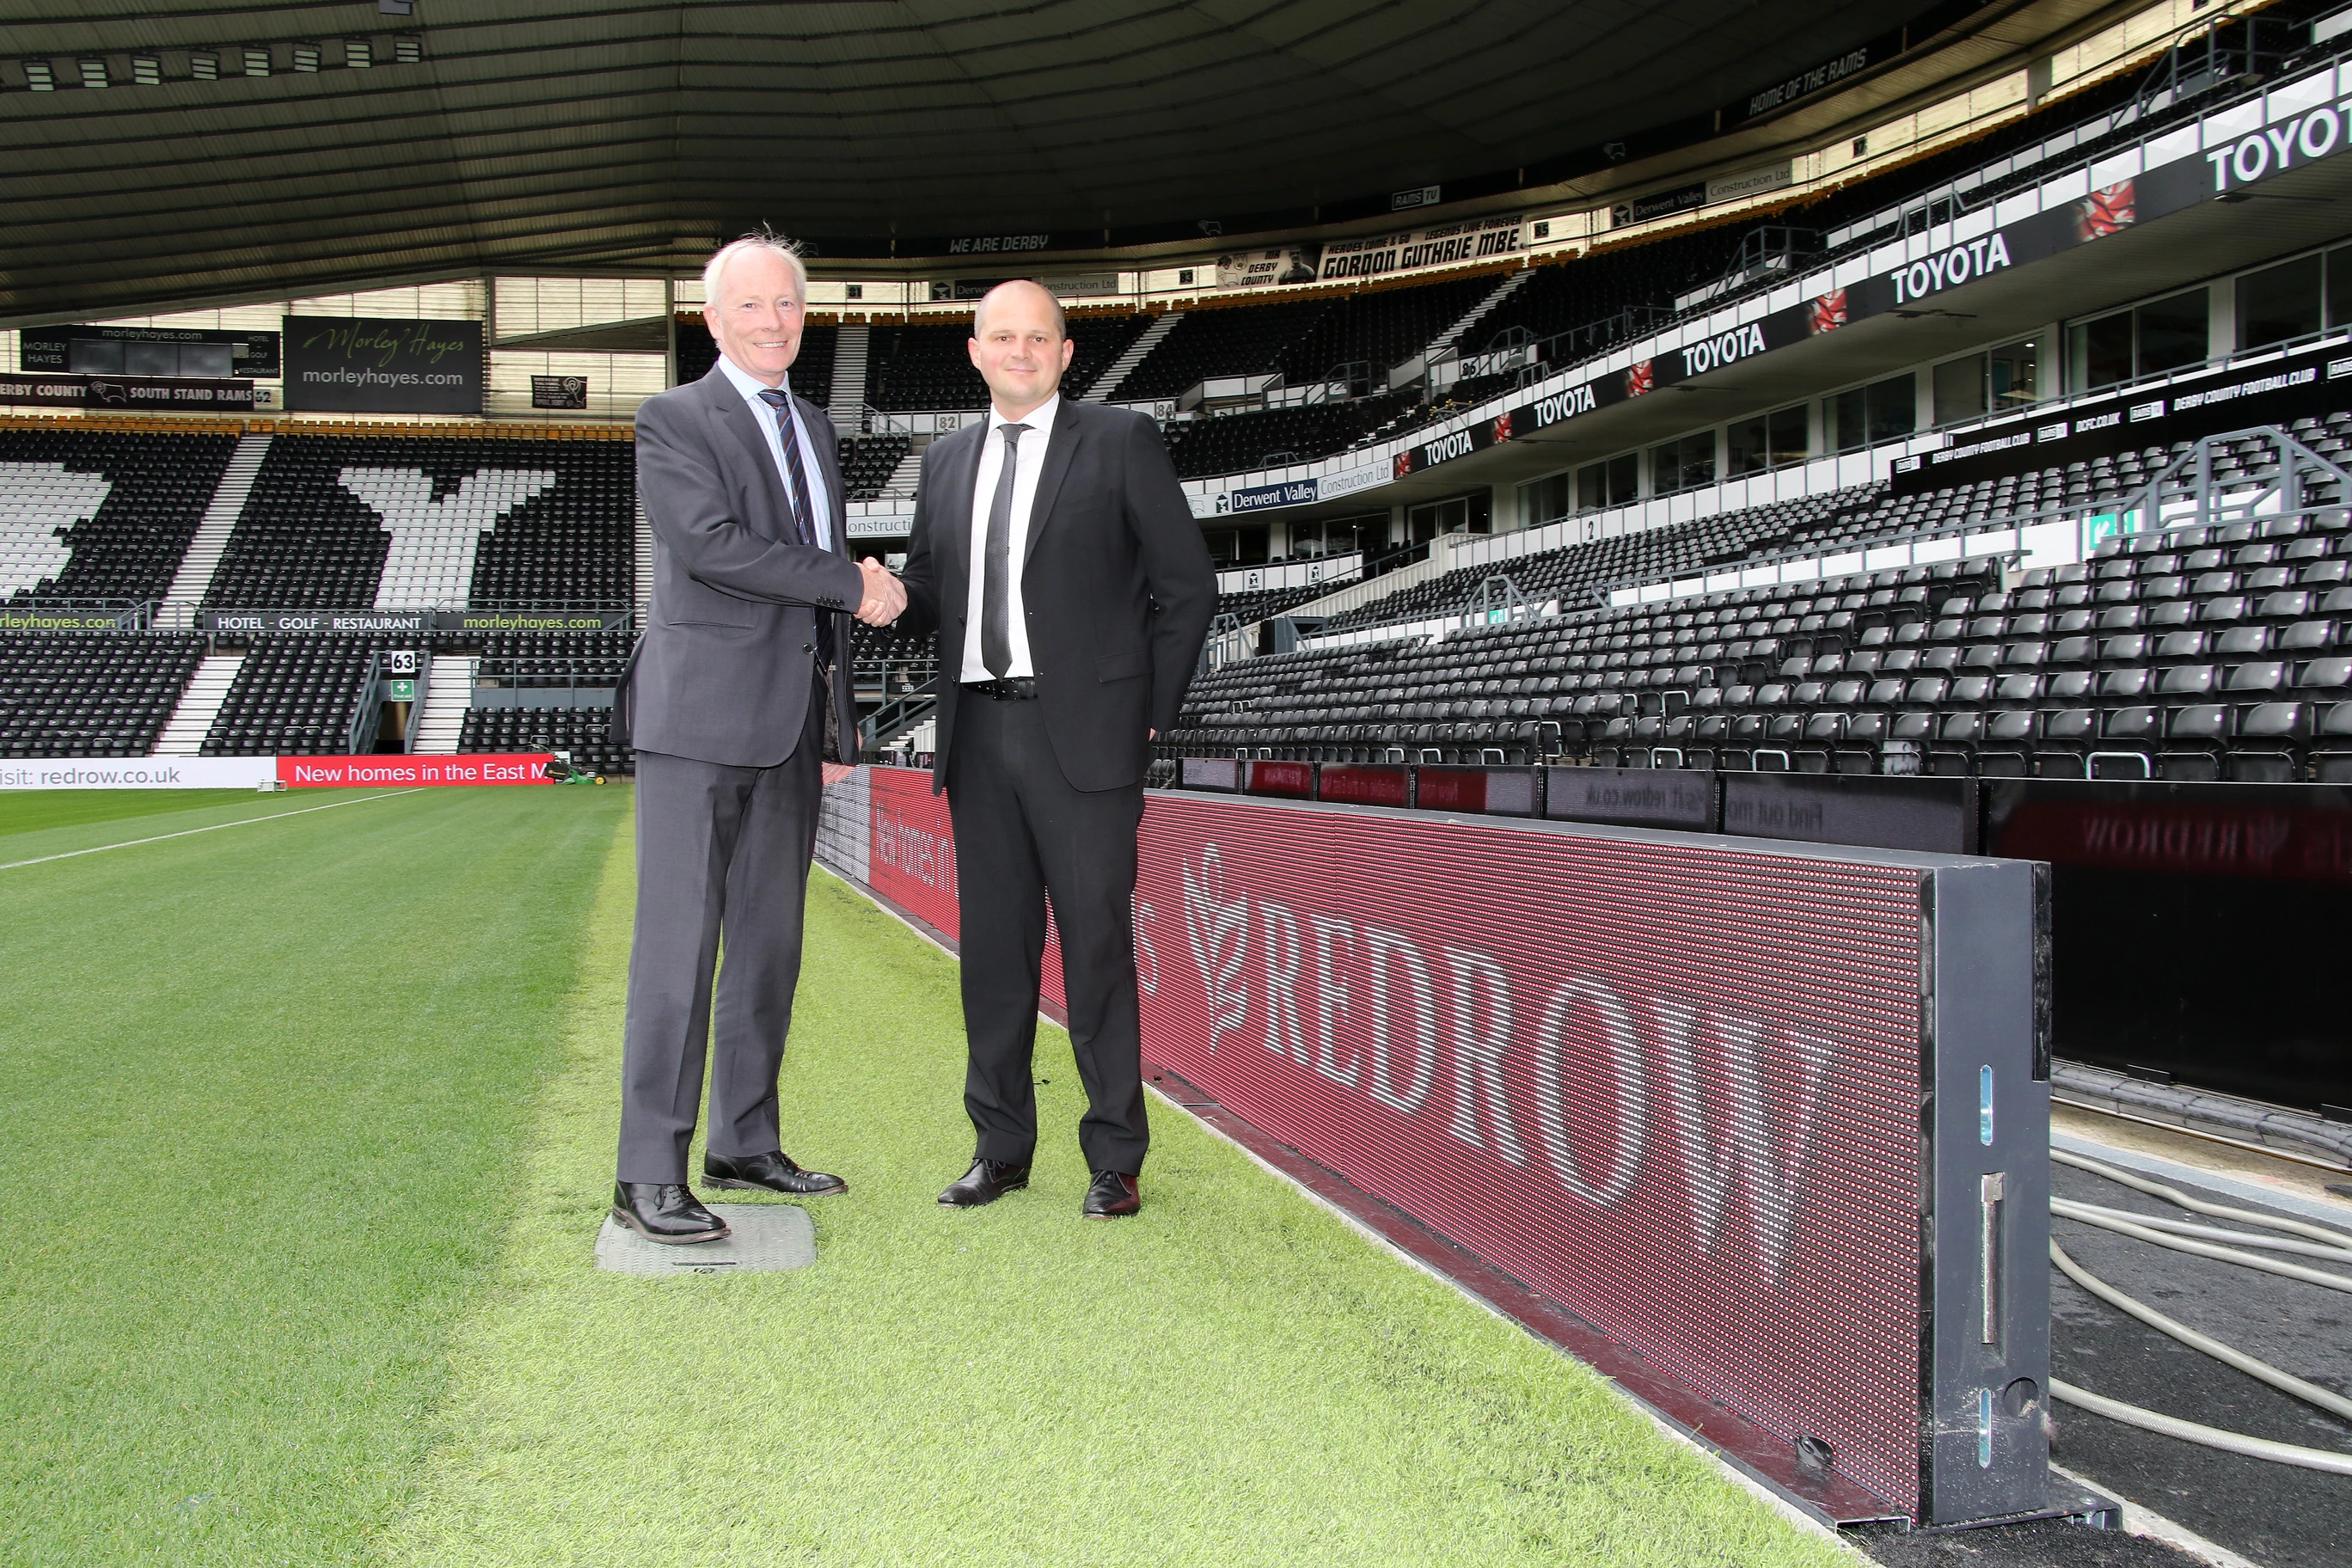 Tom Finnegan, managing director of Redrow Homes and Ashley Peden, Director of Partnerships at Derby County Football Club.